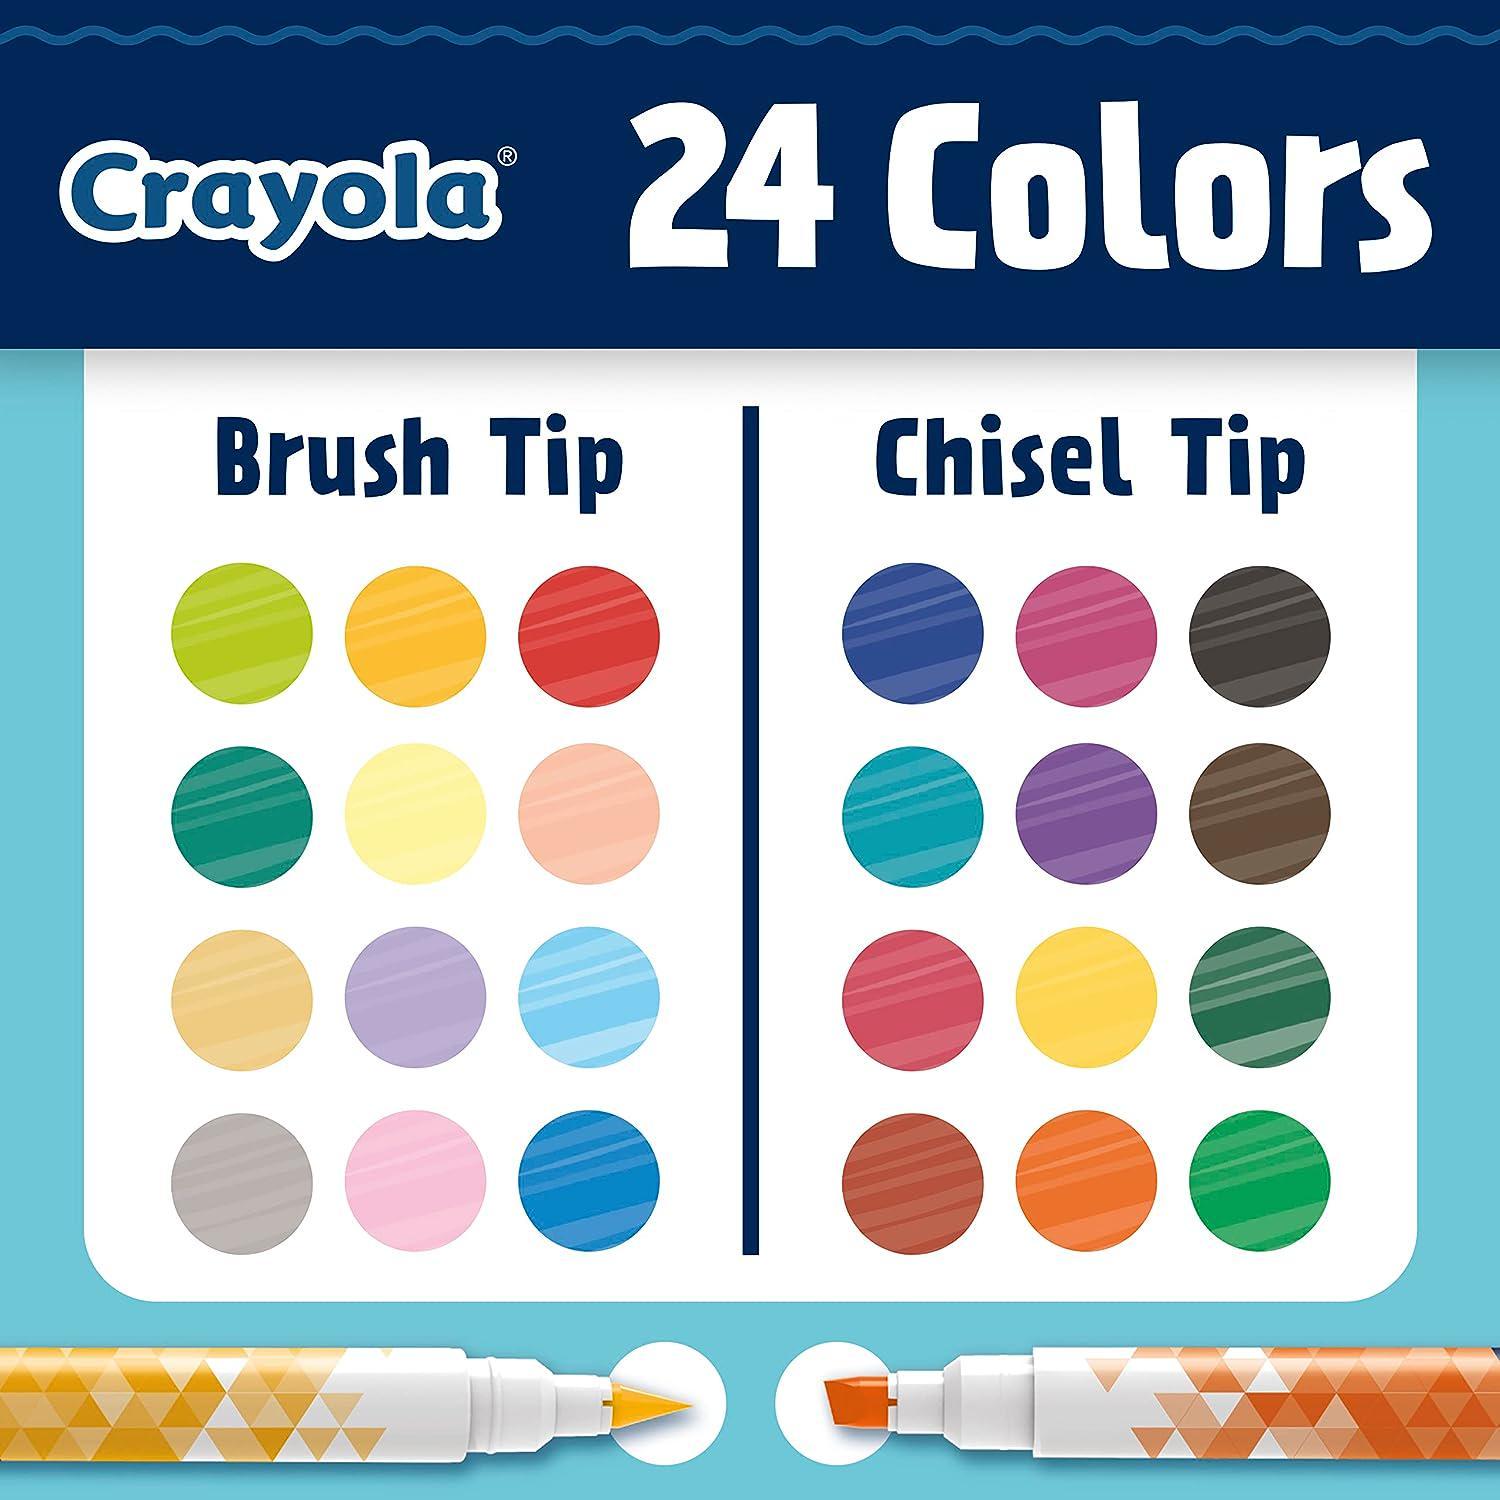 Crayola Brush & Detail Dual Tip Marker Set (32ct), Adult Coloring Markers, Gifts for Teens & Adults